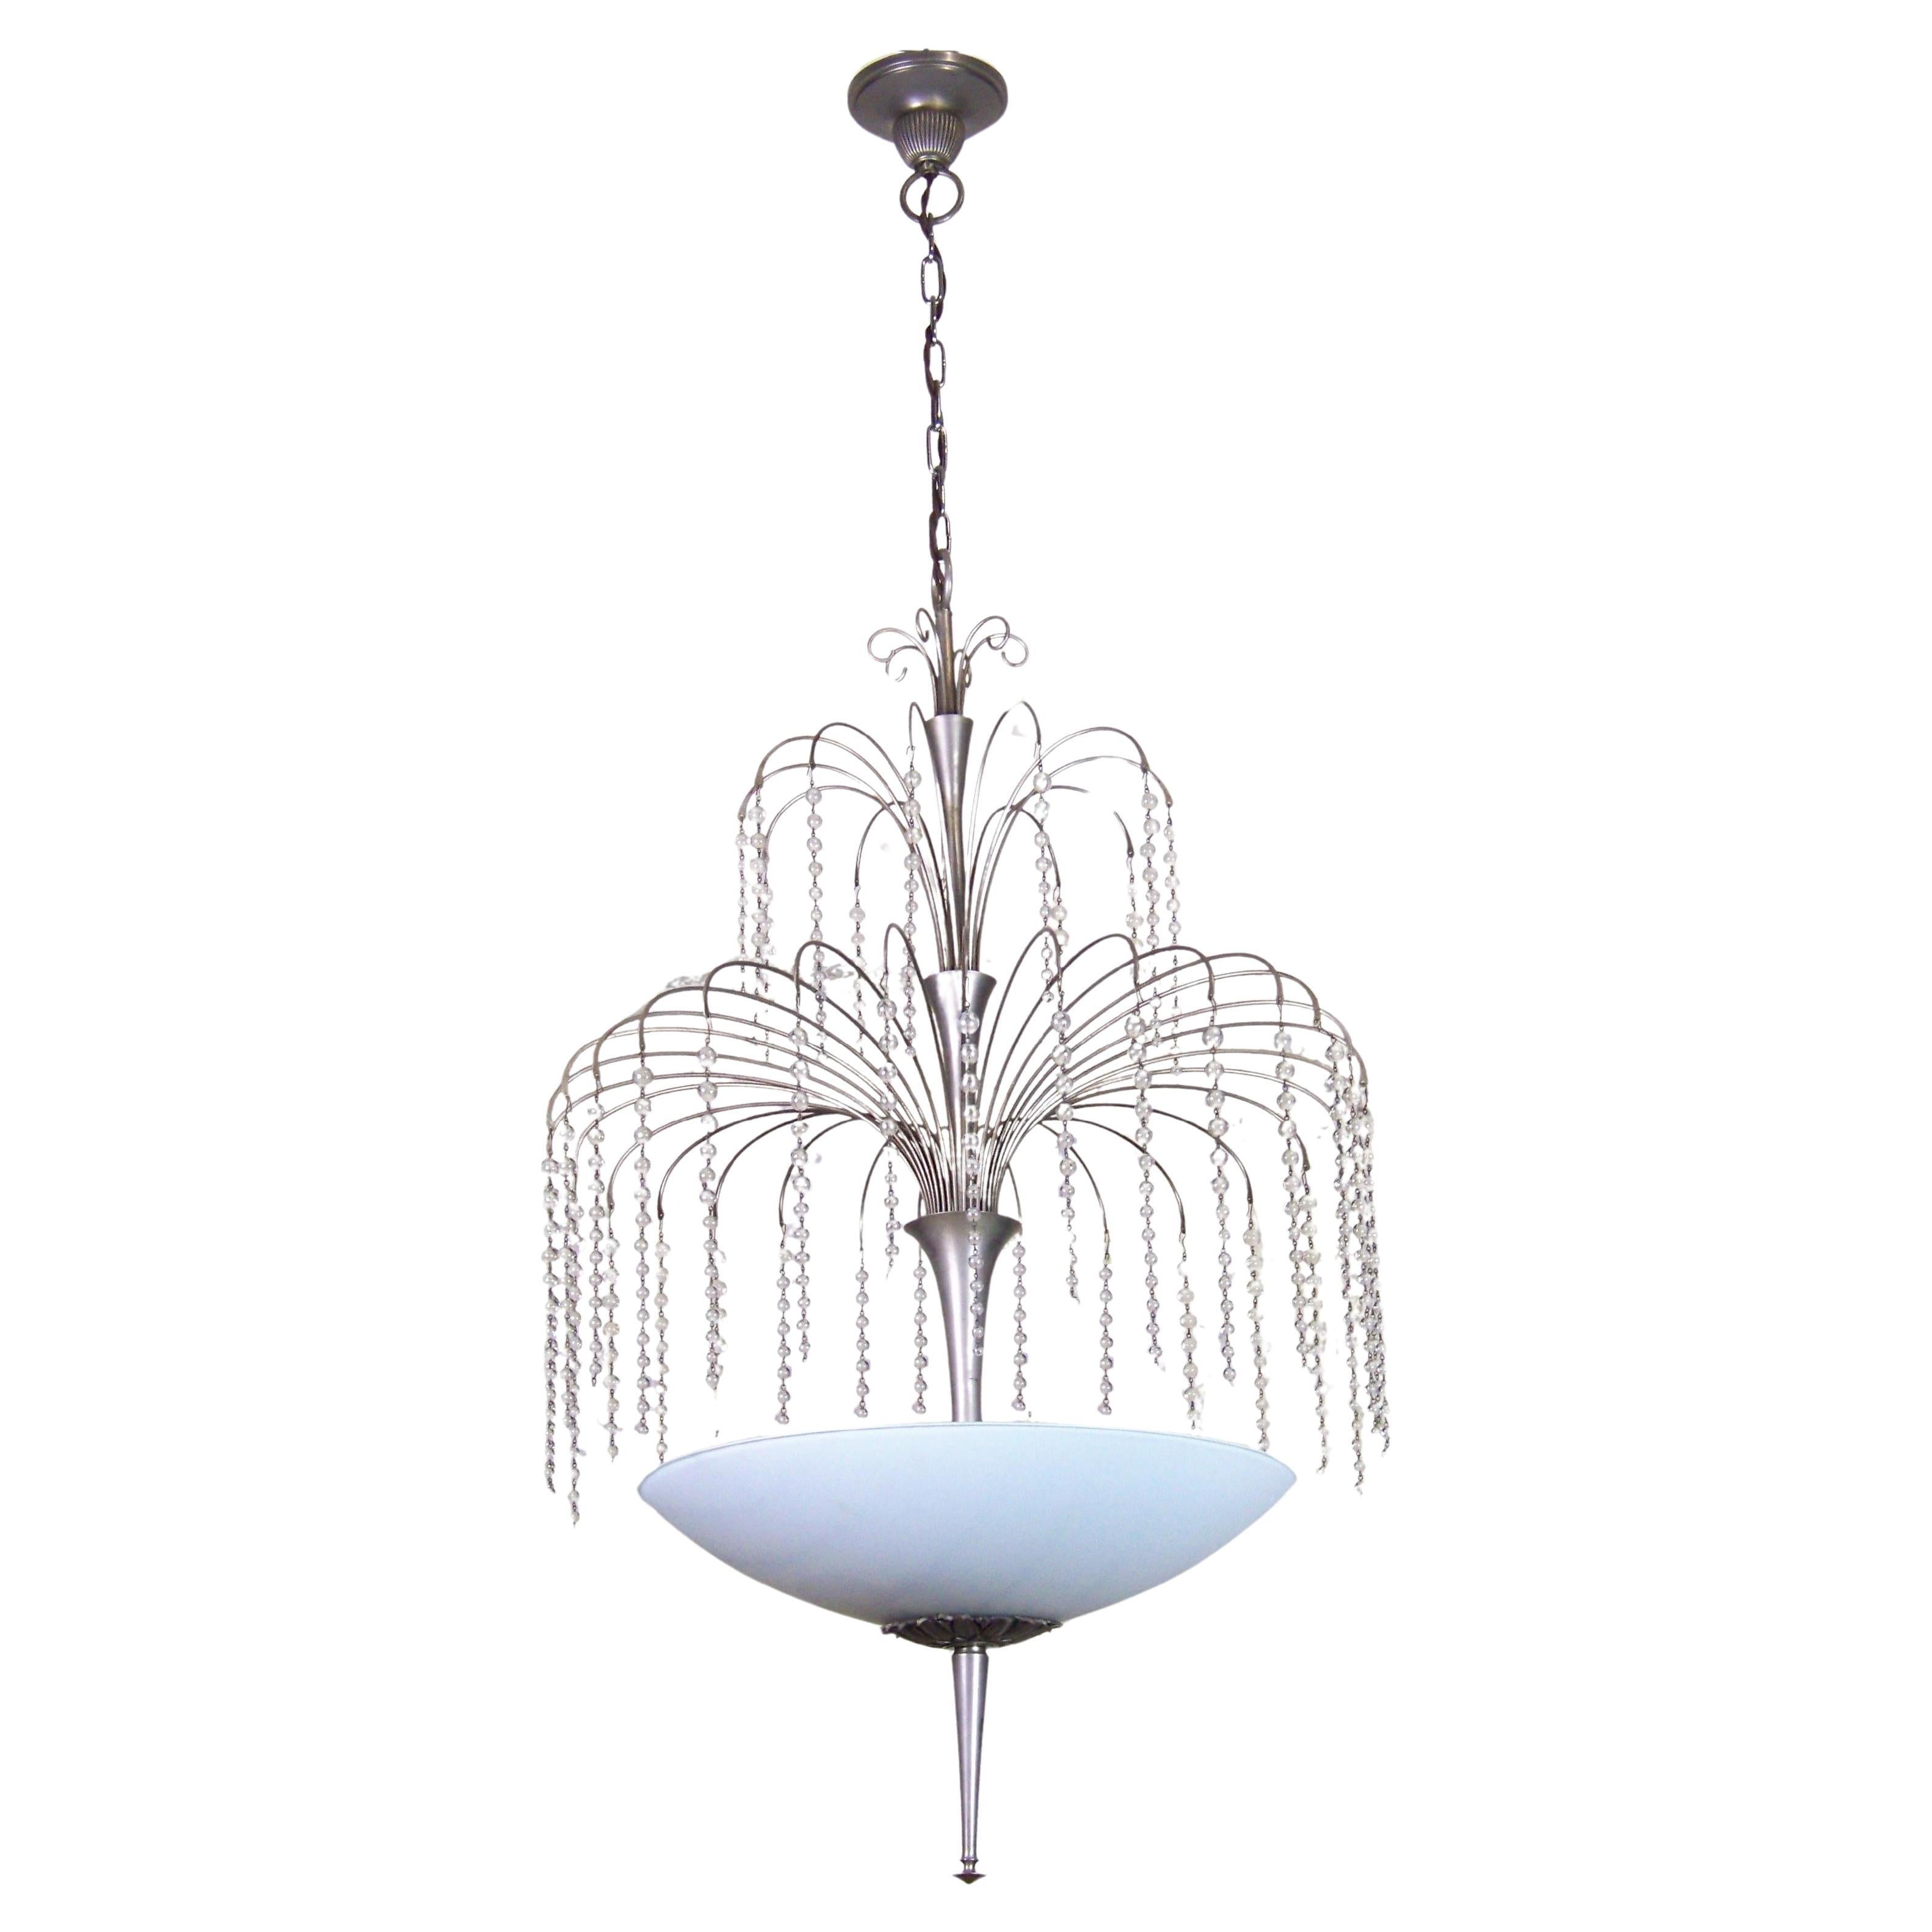 Chrome chandelier with glass trimmings, 1920ca For Sale